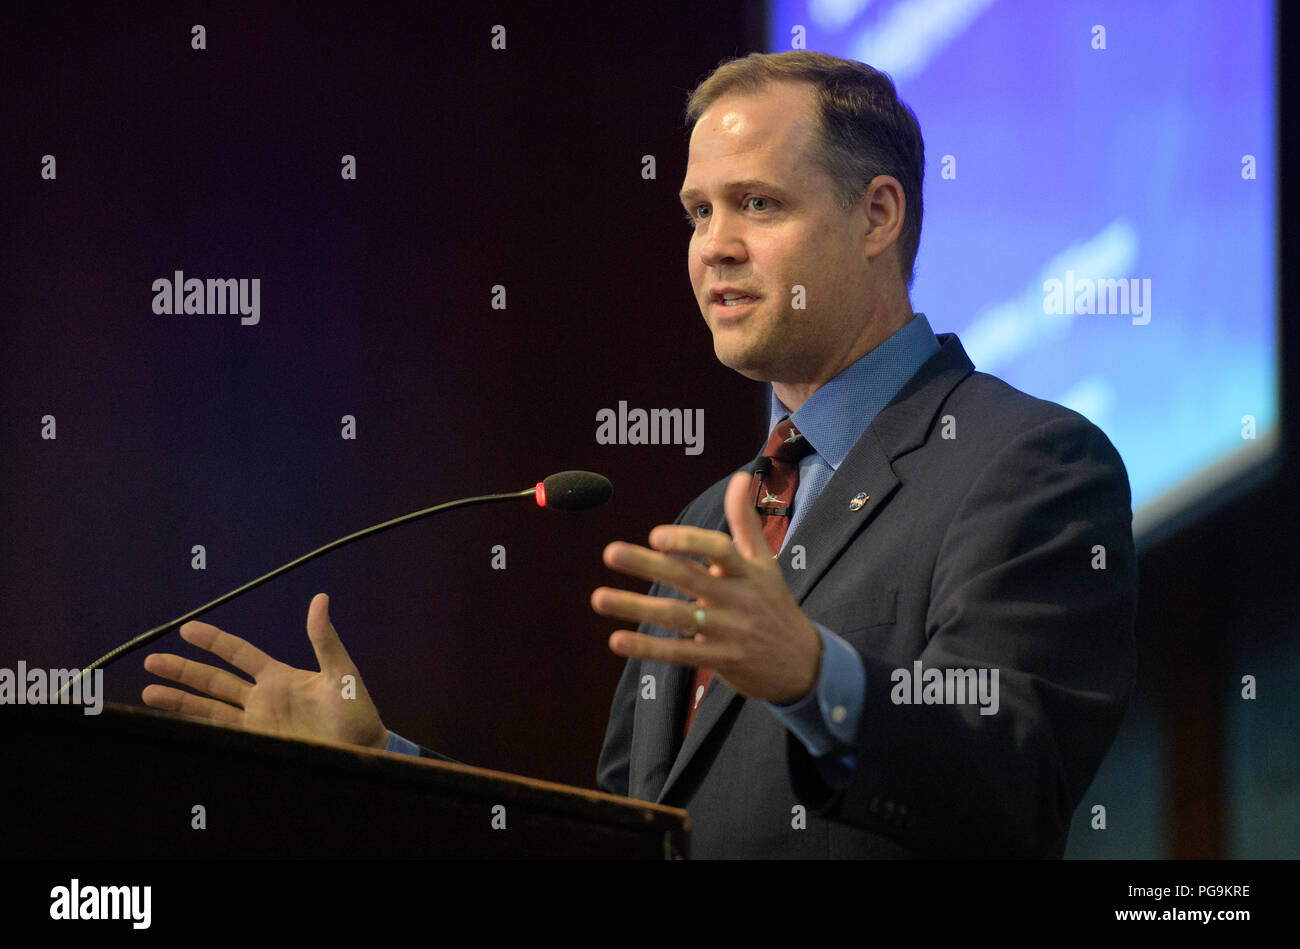 NASA Administrator Jim Bridenstine speaks at an event celebrating NASA's 60th anniversary at the Center for Strategic and International Studies on Monday, July 23, 2018 in Washington. Following his remarks, the administrator participated in a panel discussion with former administrators Sean O'Keefe and Charles Bolden. ( Stock Photo